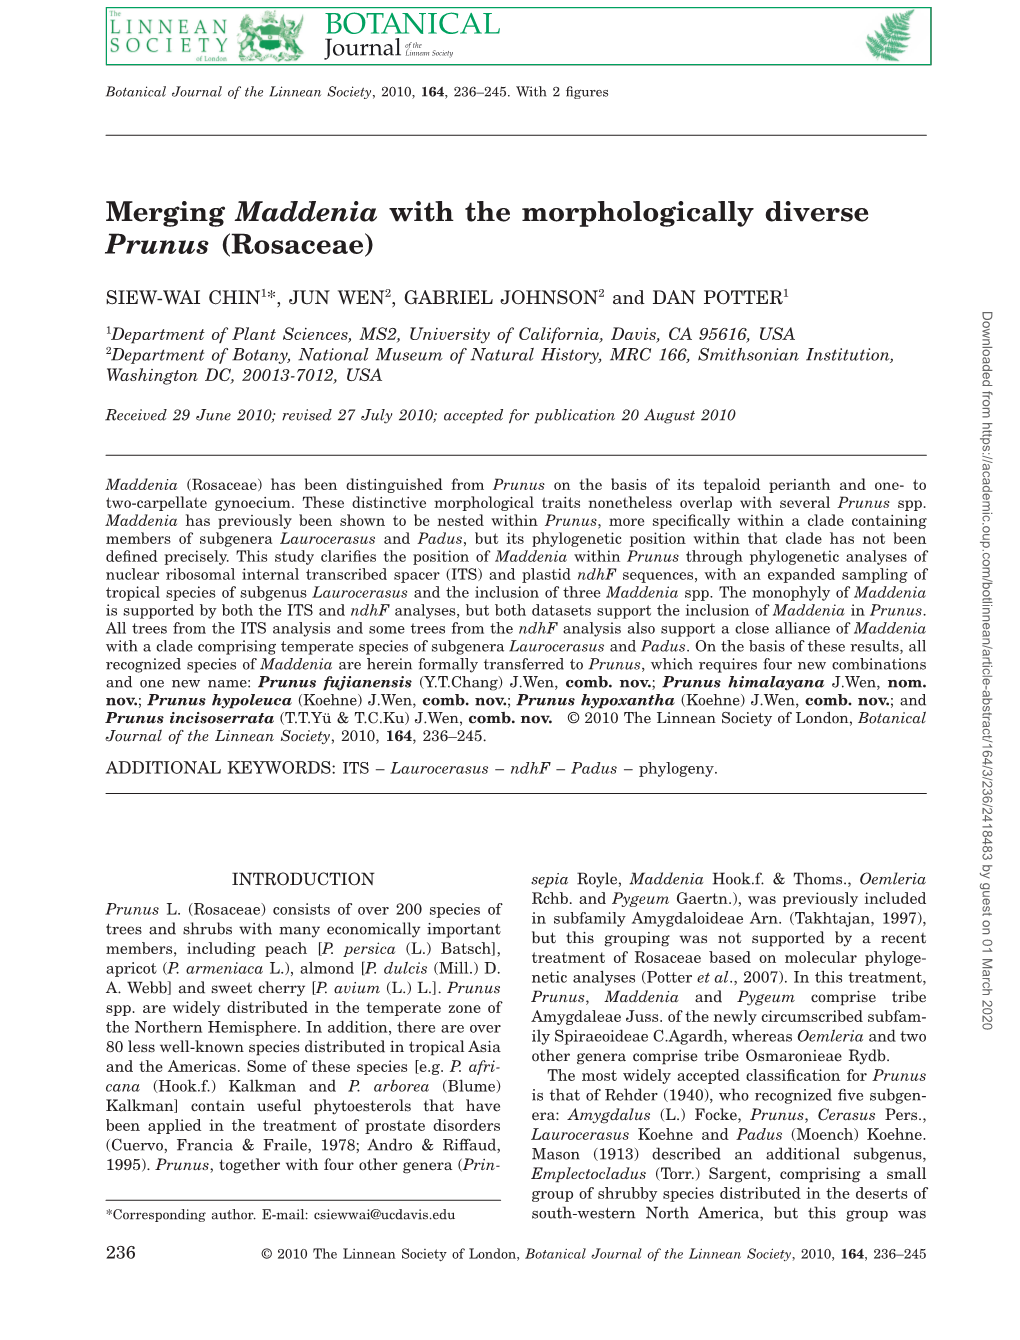 Merging Maddenia with the Morphologically Diverse Prunus